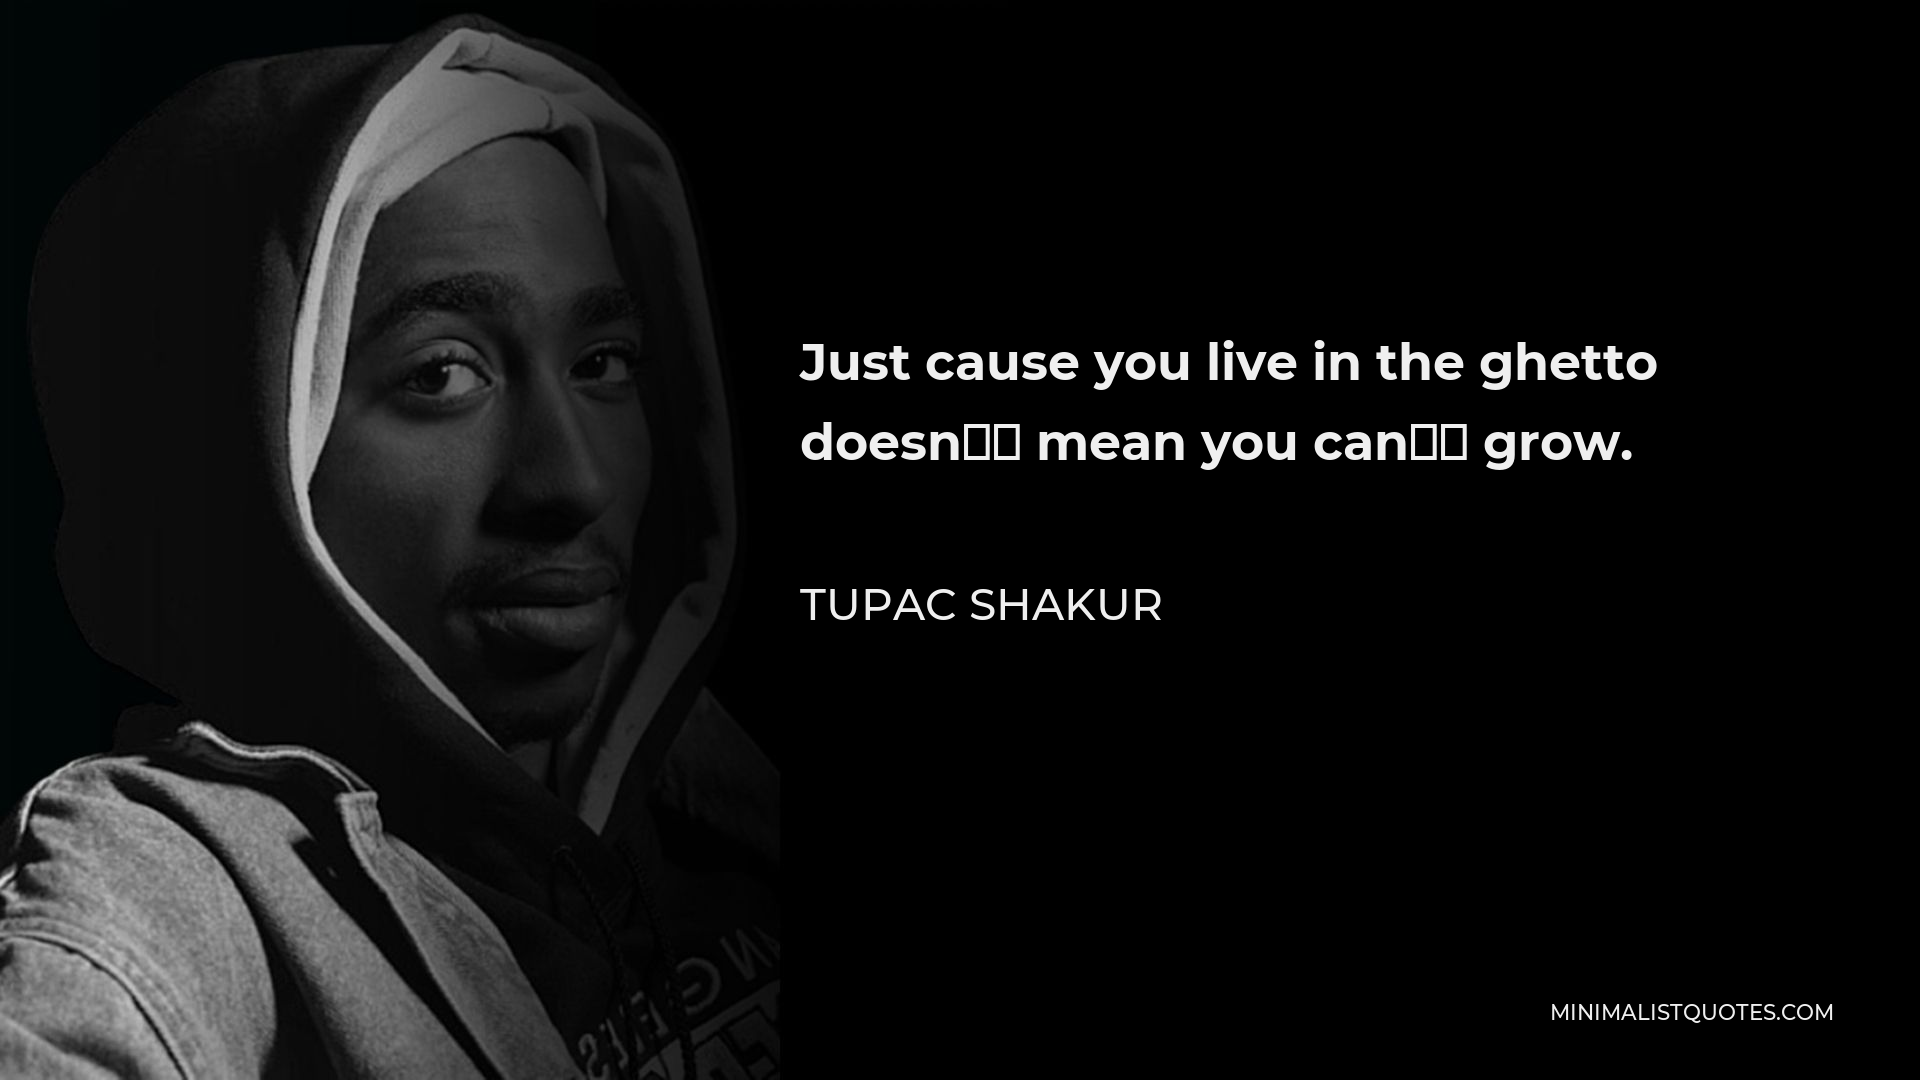 Tupac Shakur Quote - Just cause you live in the ghetto doesn’t mean you can’t grow.